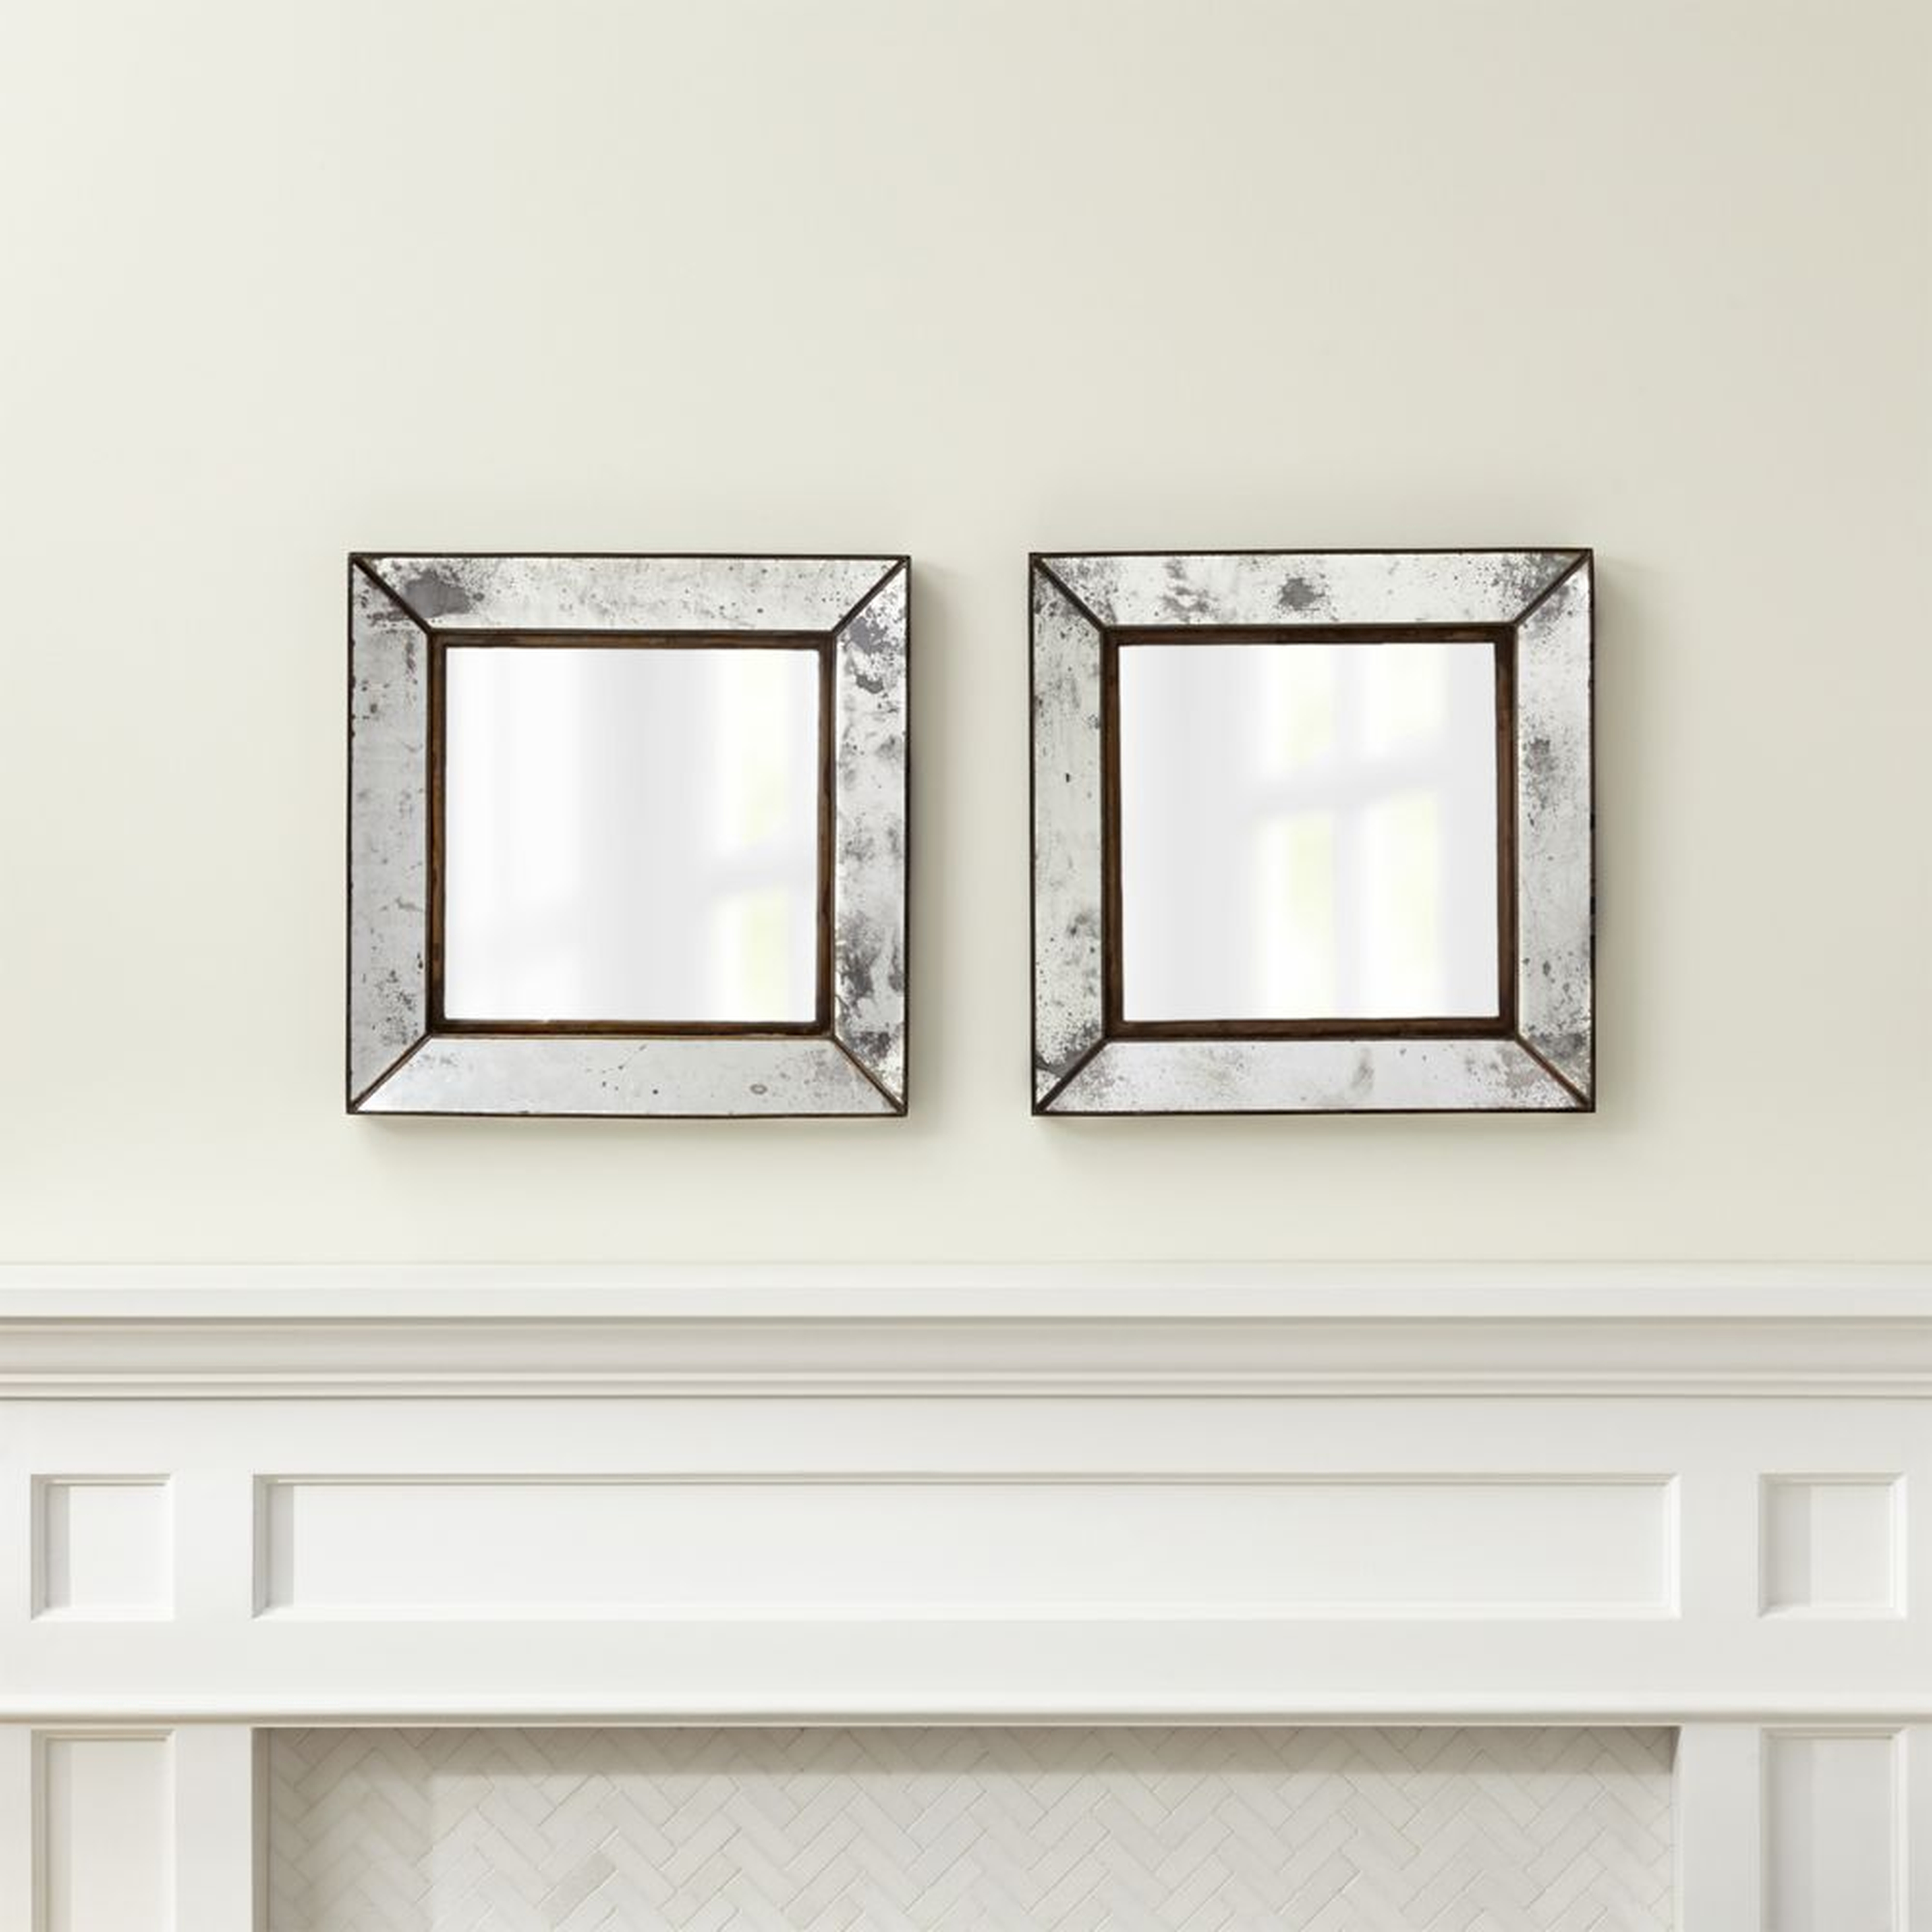 Dubois Small Square Wall Mirrors, Set of 2 - Crate and Barrel